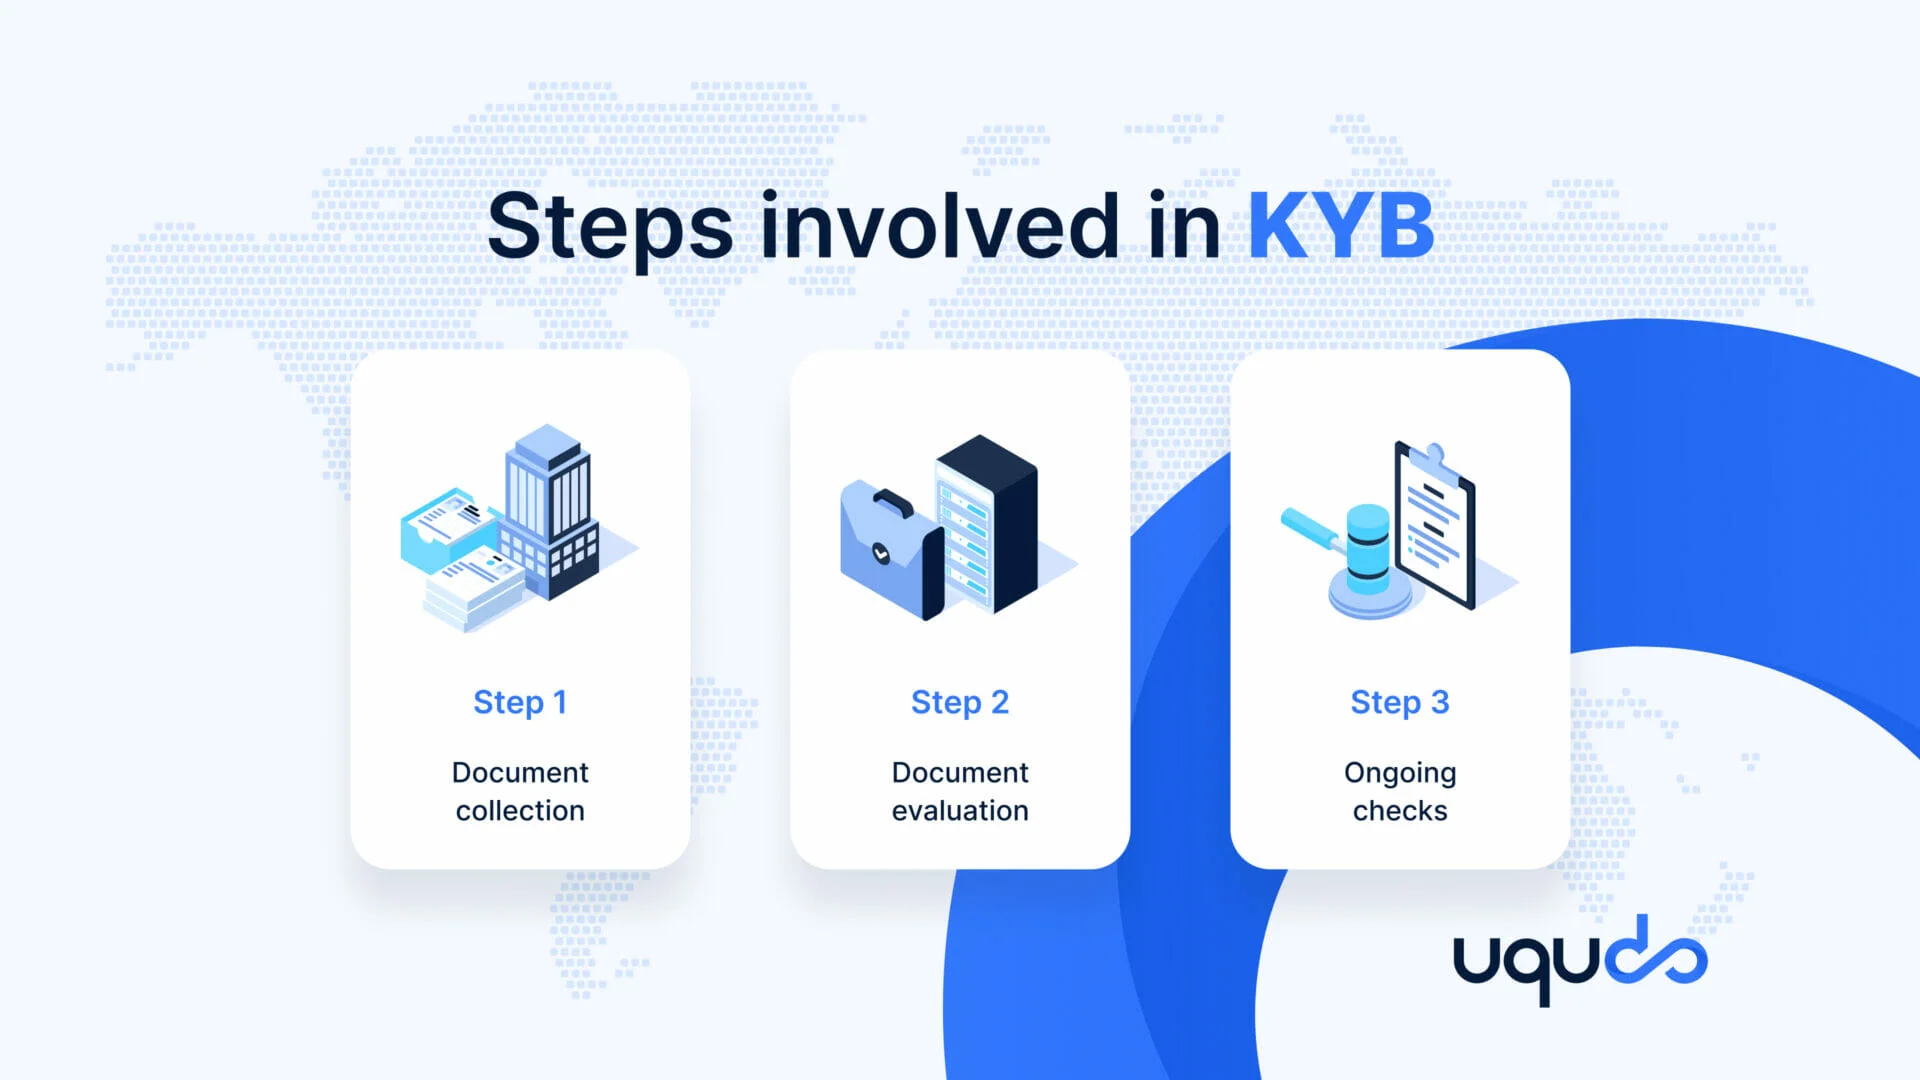 Steps involved in KYB